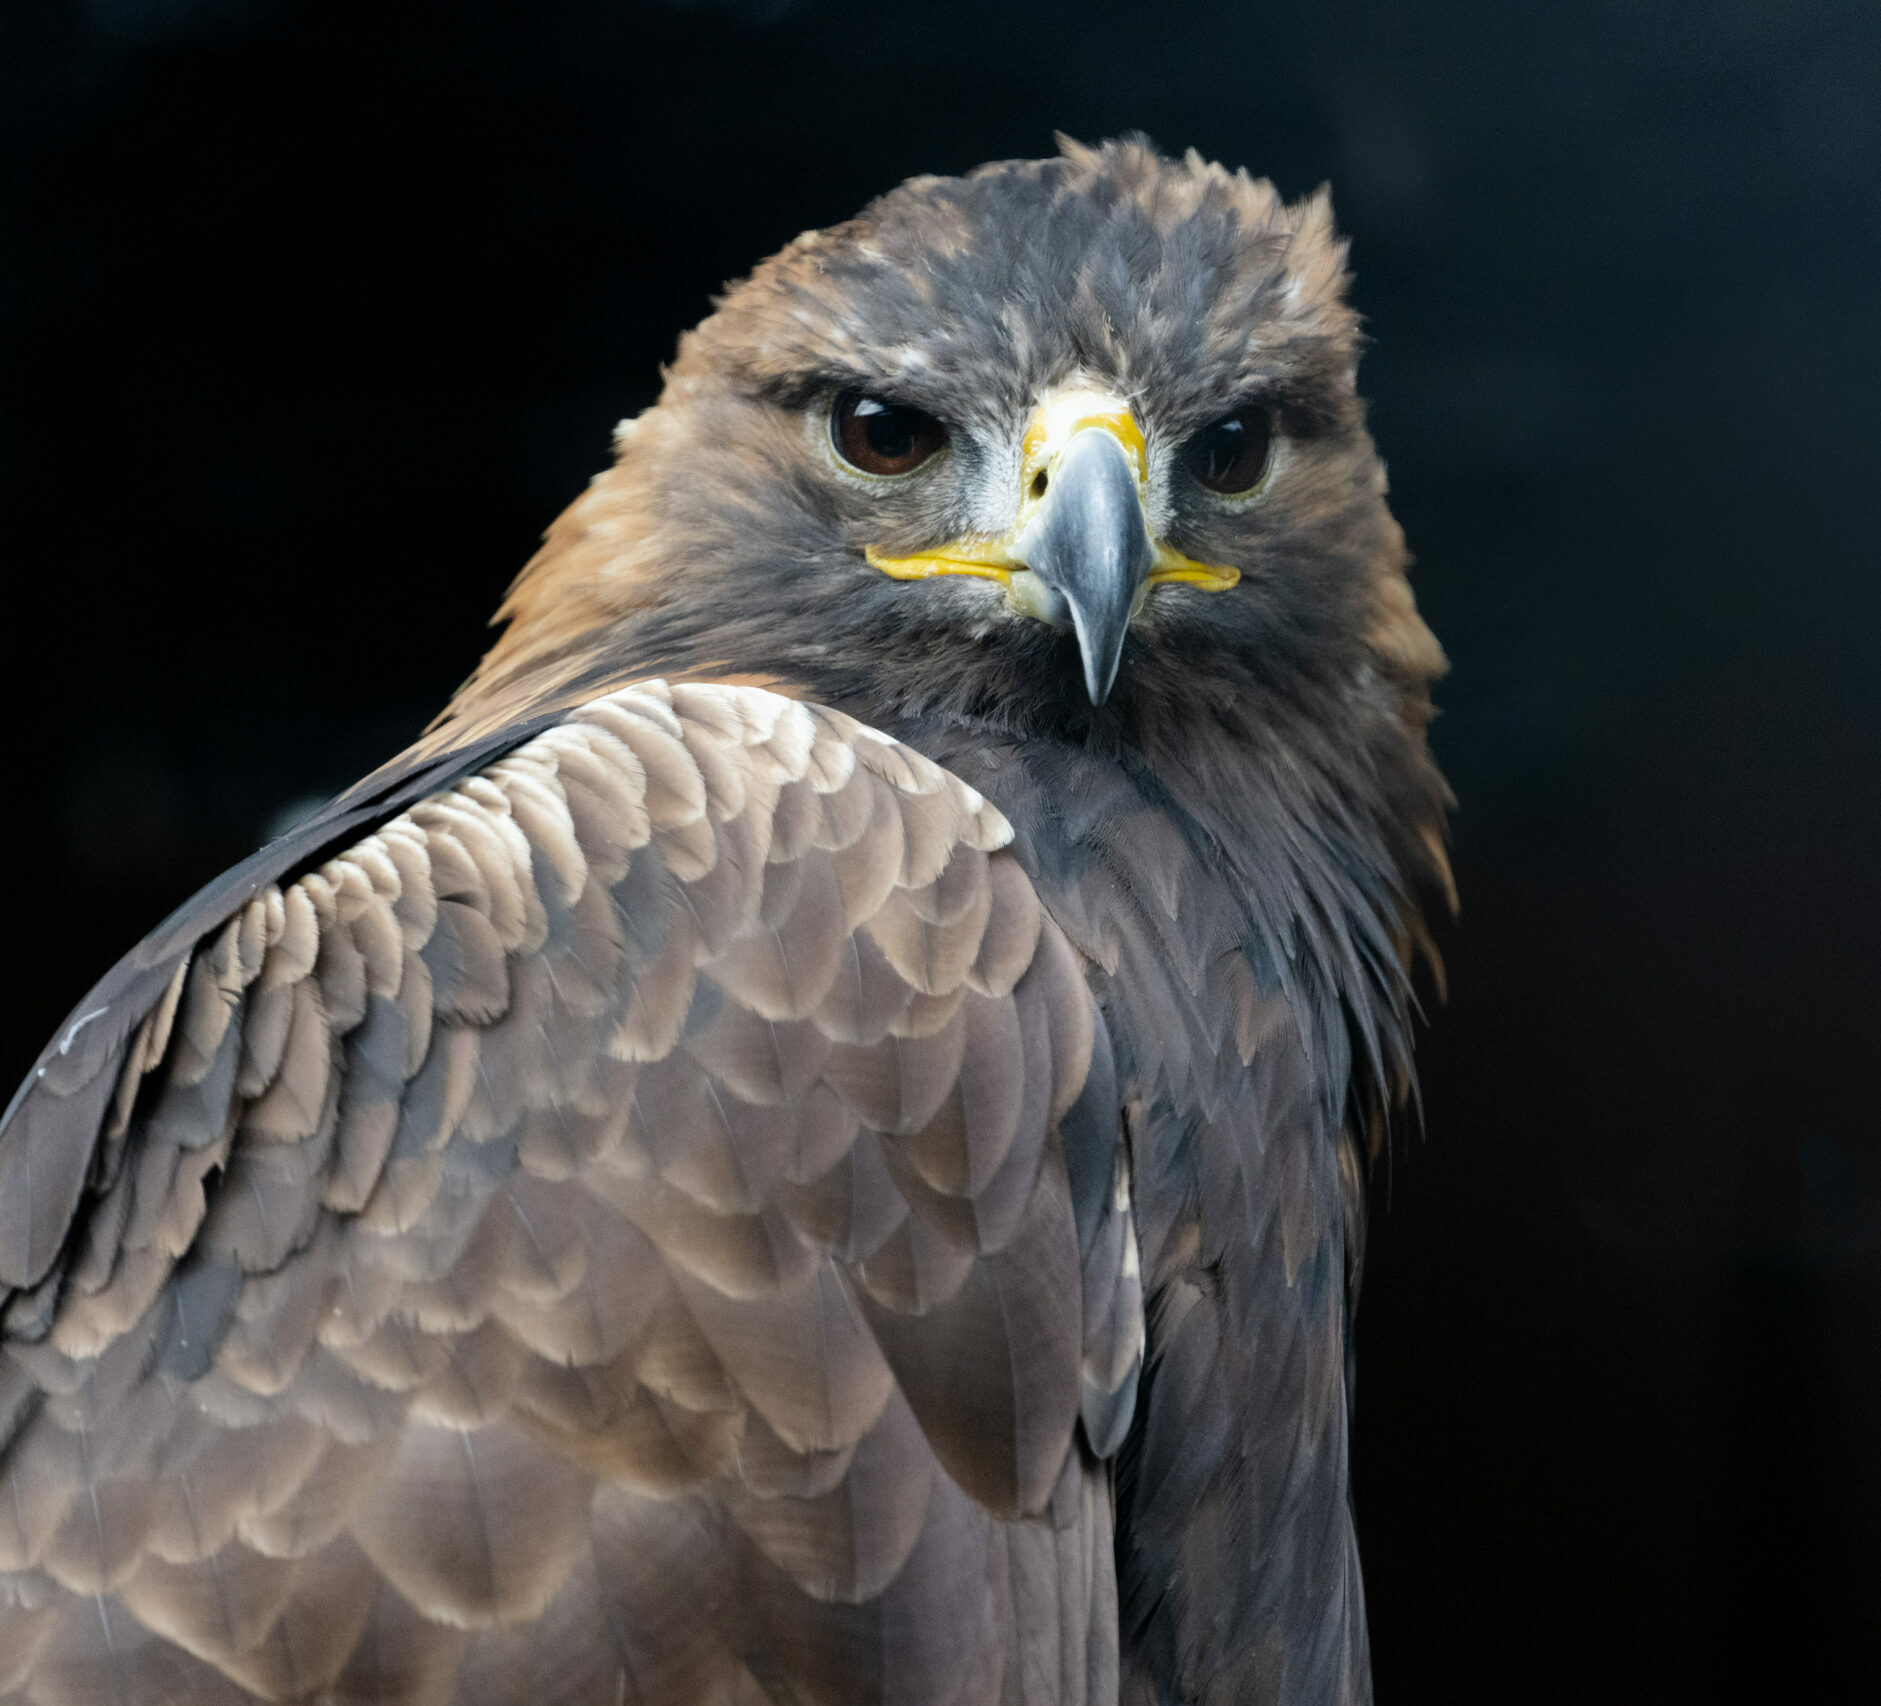 A perfectly framed close up headshot of a Golden Eagle.